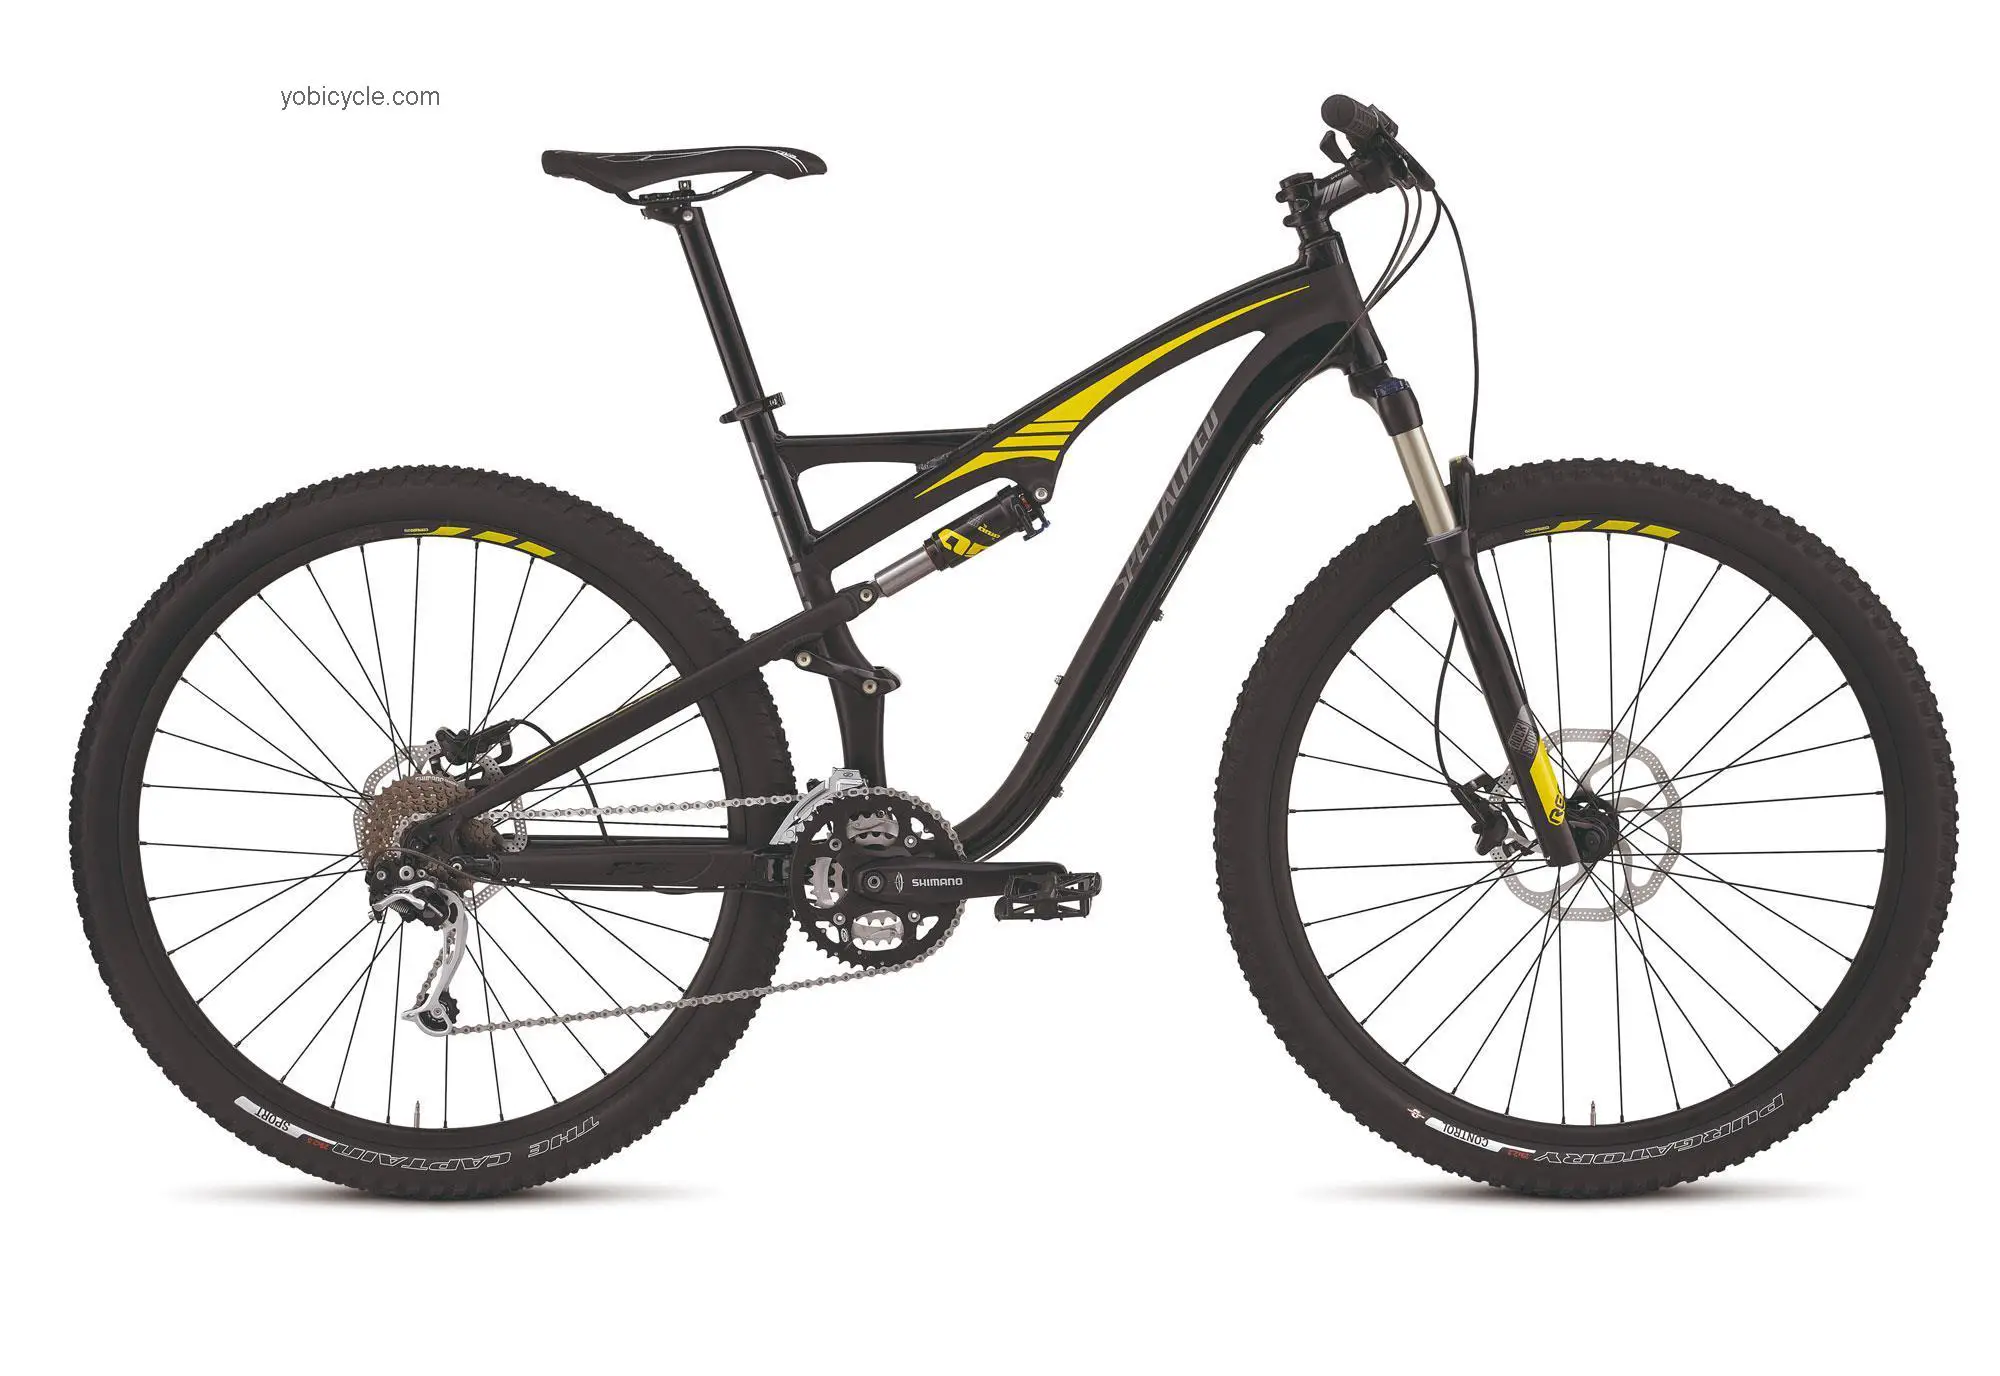 Specialized Camber FSR 29 2012 comparison online with competitors